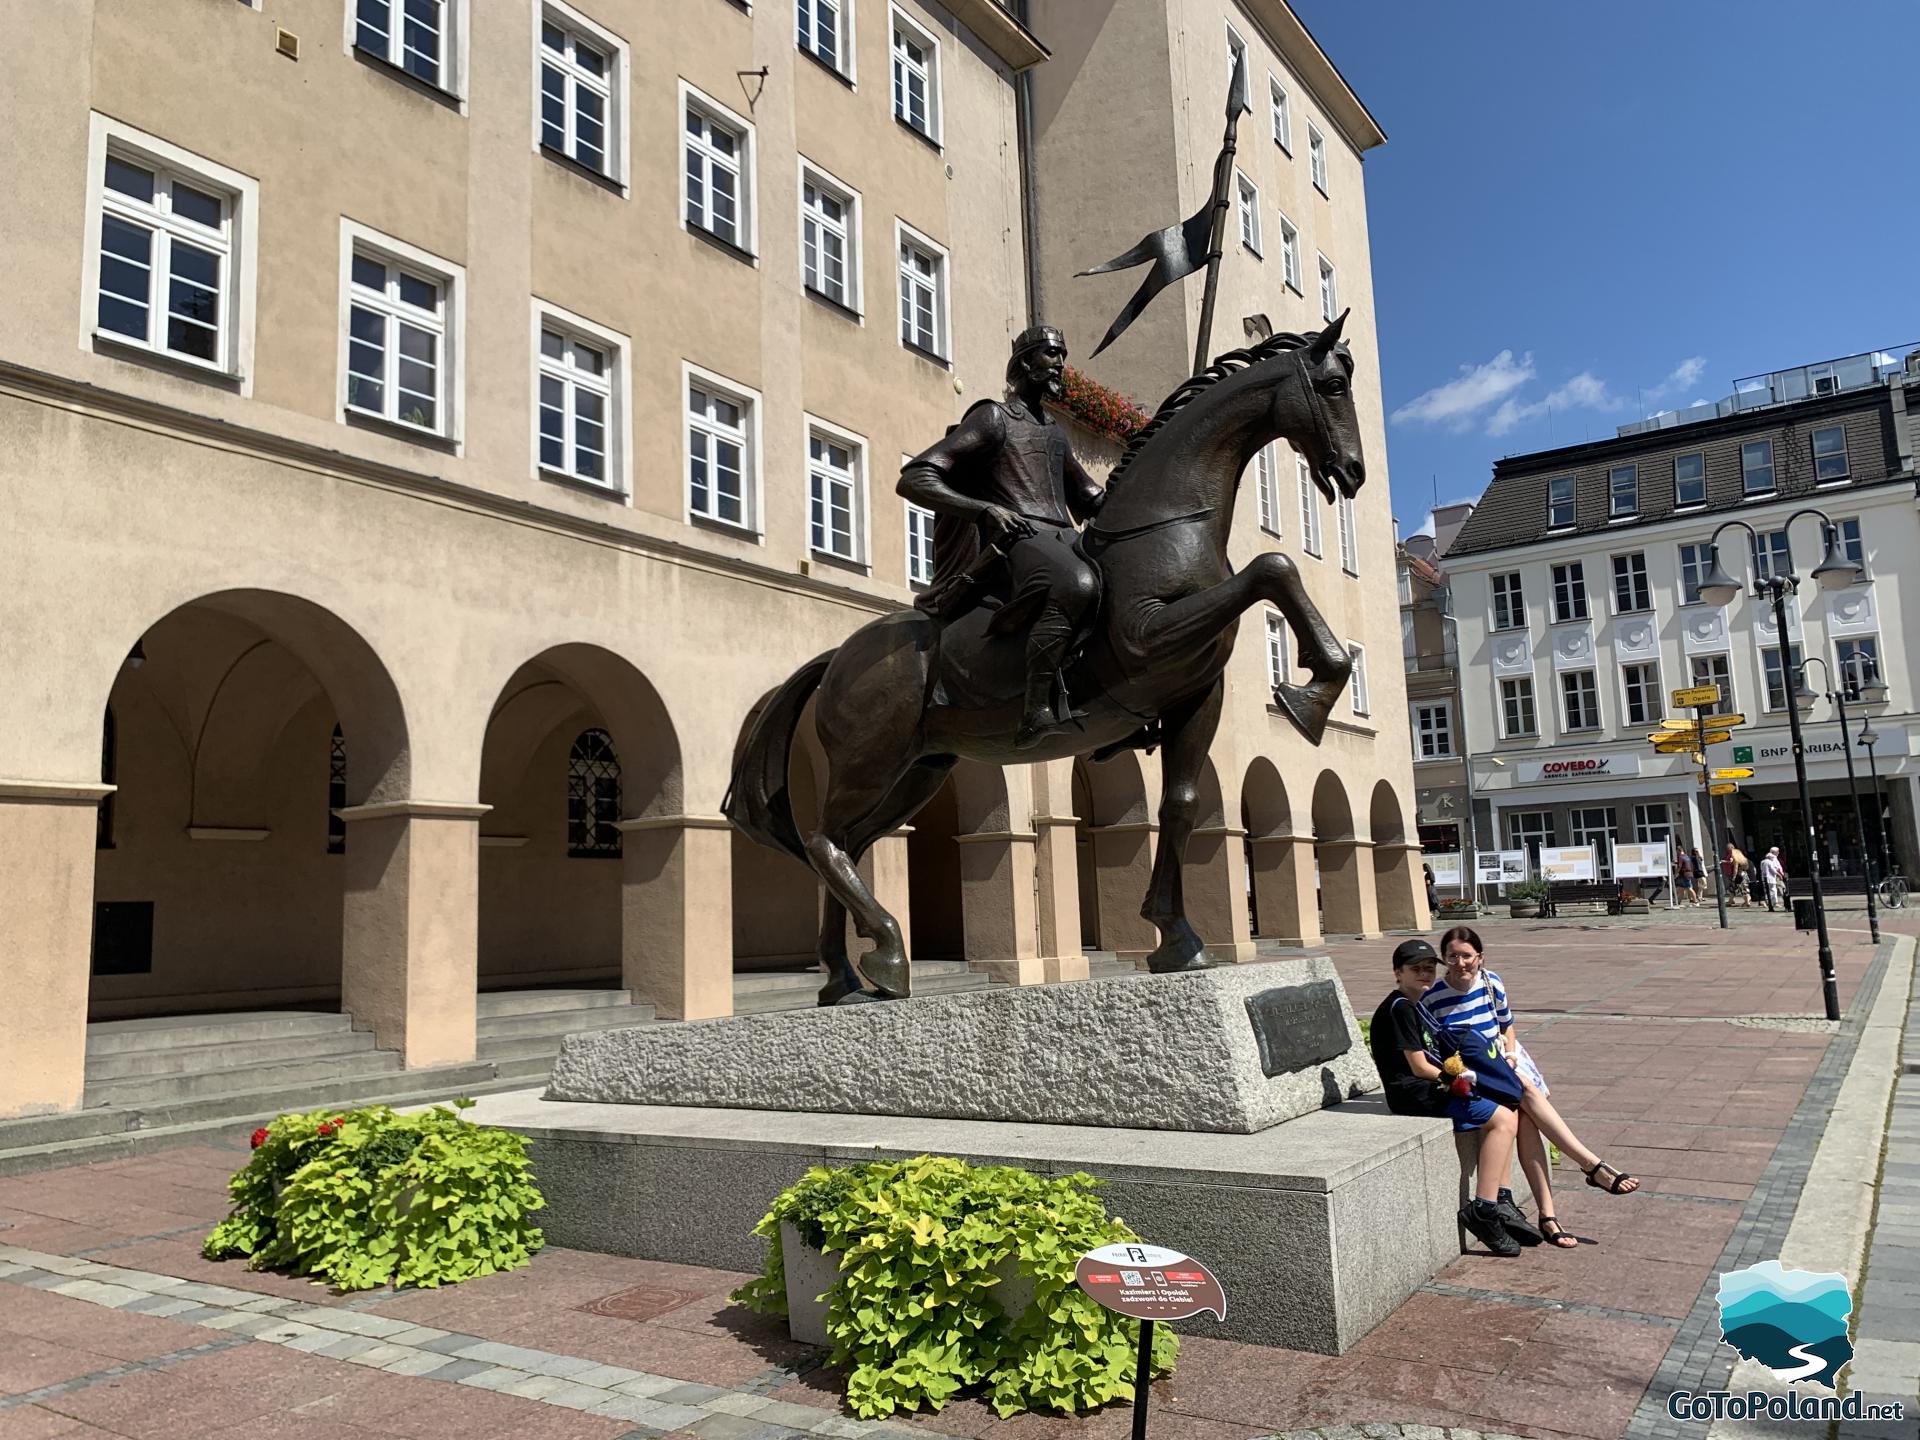 on the main square there is a sculpture of a prince on horseback, behind it the town hall building